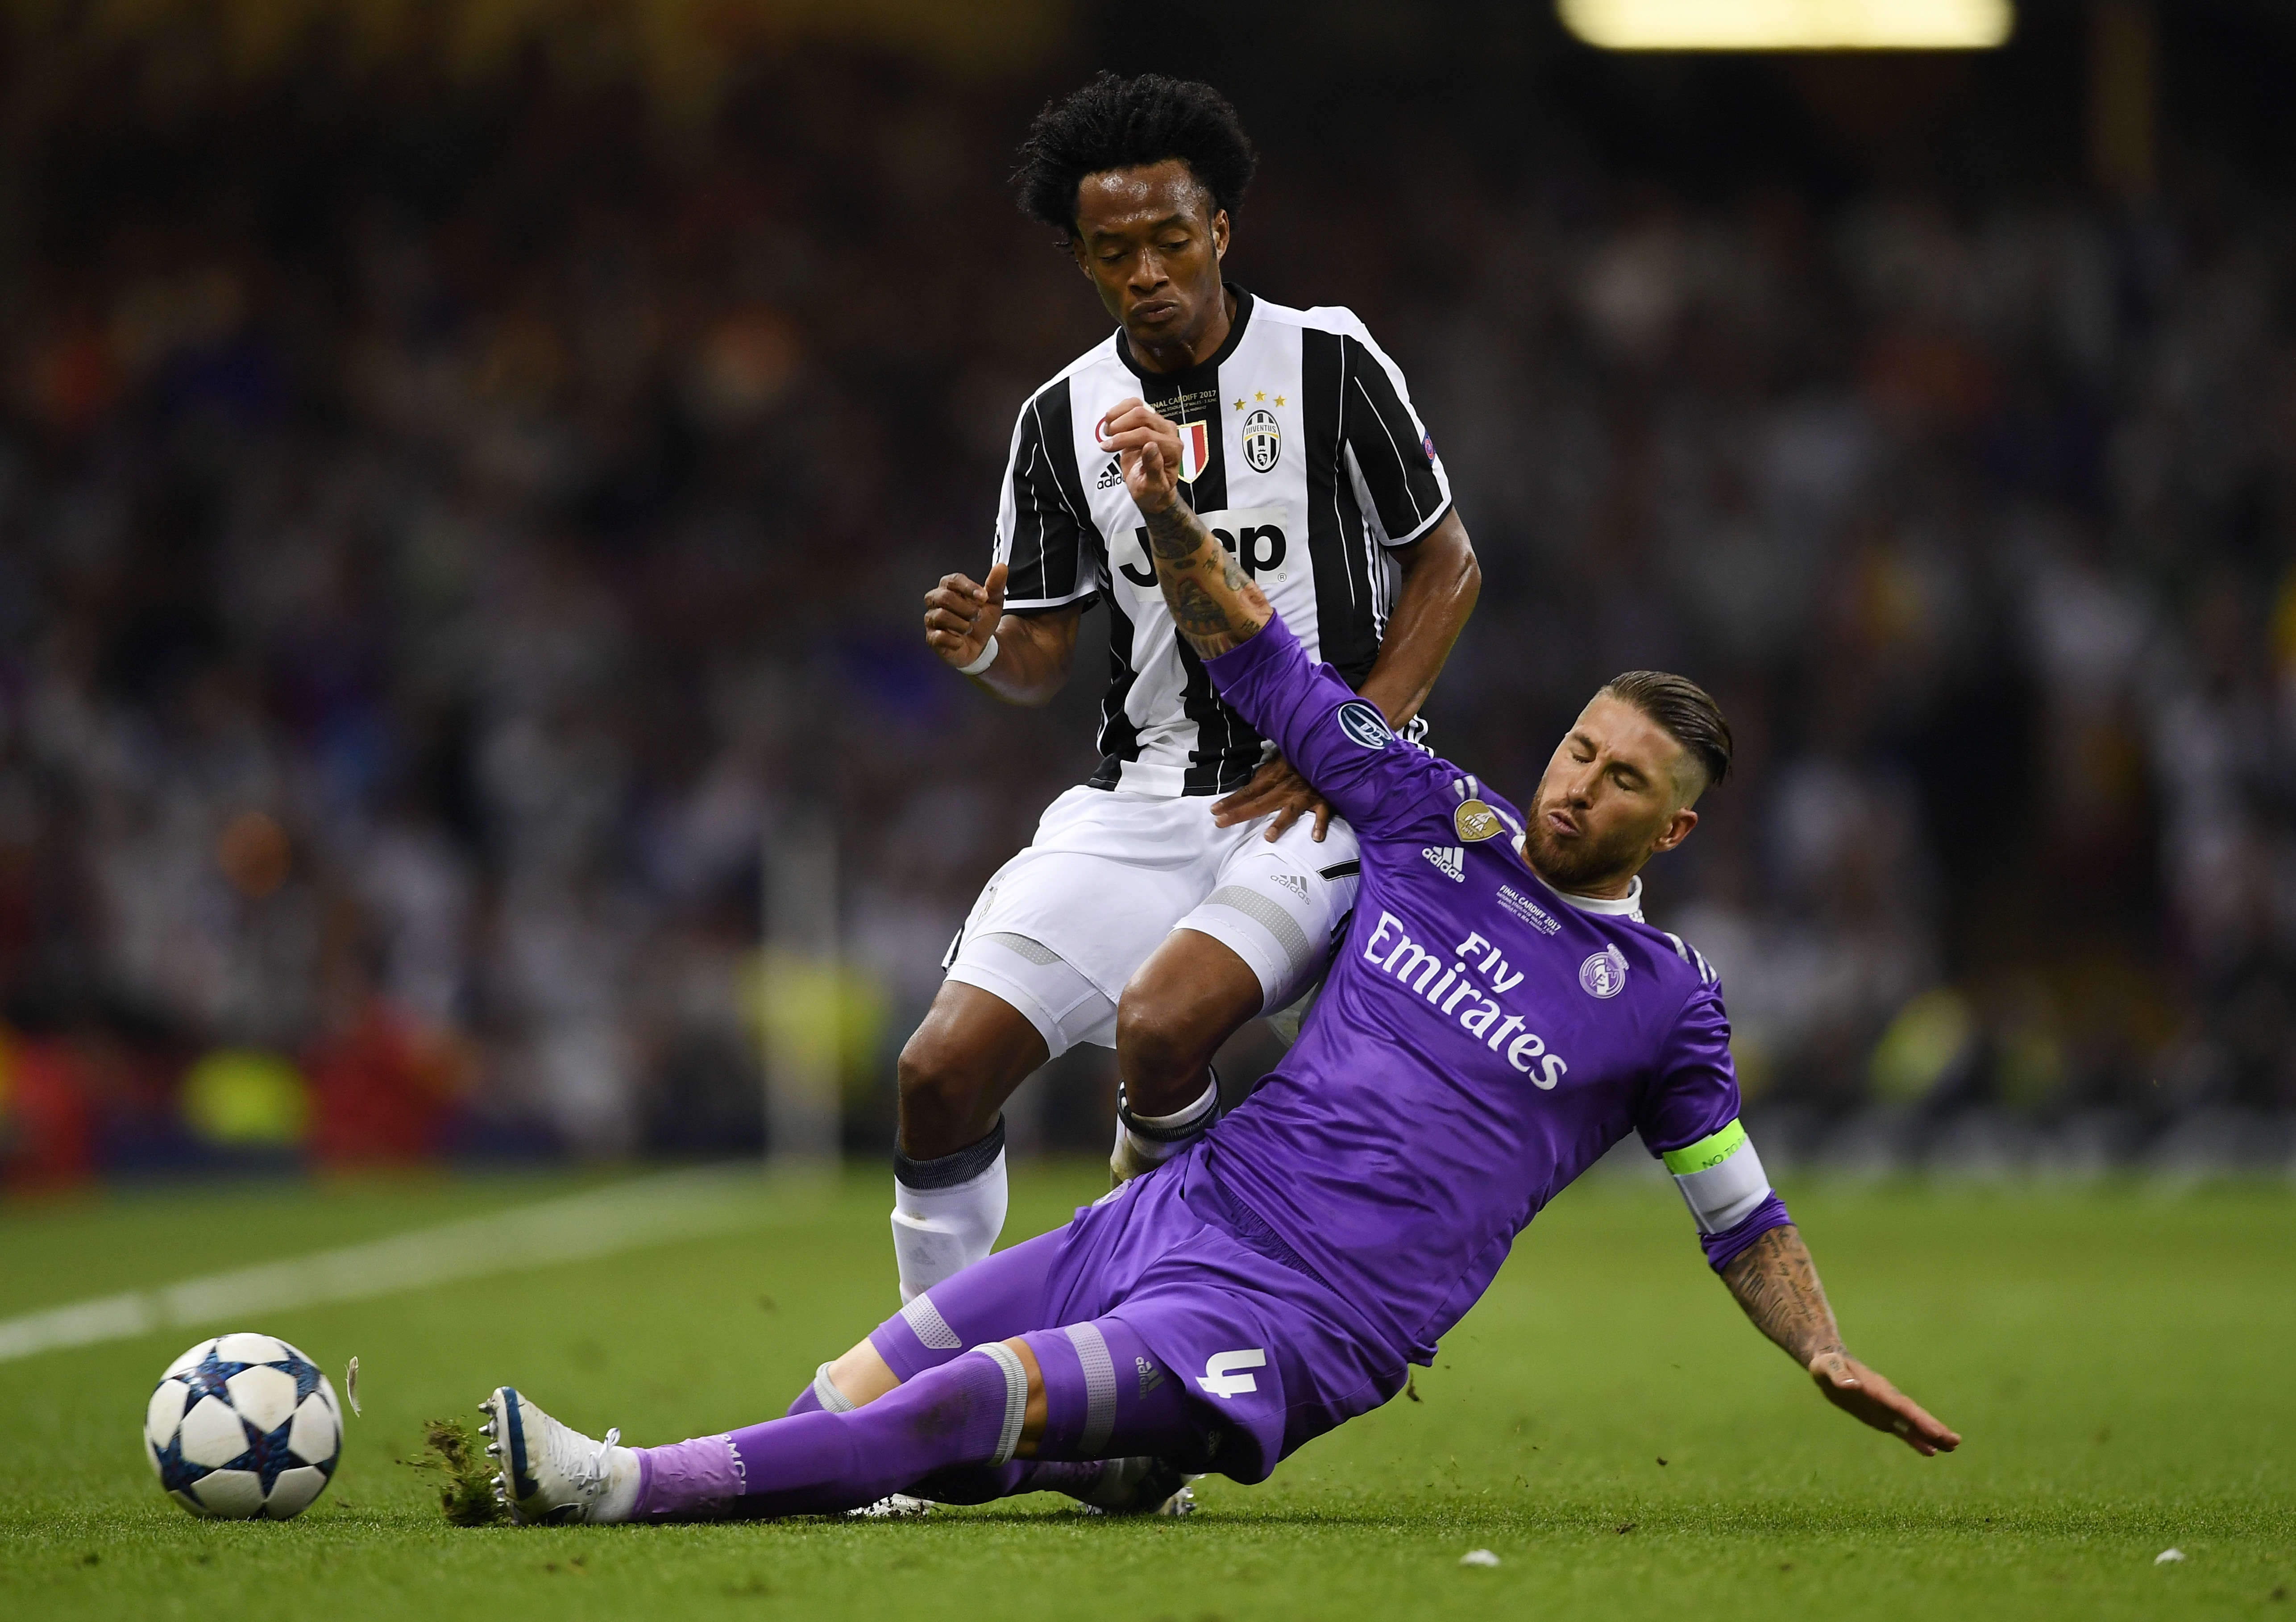 CARDIFF, WALES - JUNE 03:  Juan Cuadrado of Juventus and Sergio Ramos of Real Madrid battle for possession during the UEFA Champions League Final between Juventus and Real Madrid at National Stadium of Wales on June 3, 2017 in Cardiff, Wales.  (Photo by Shaun Botterill/Getty Images)